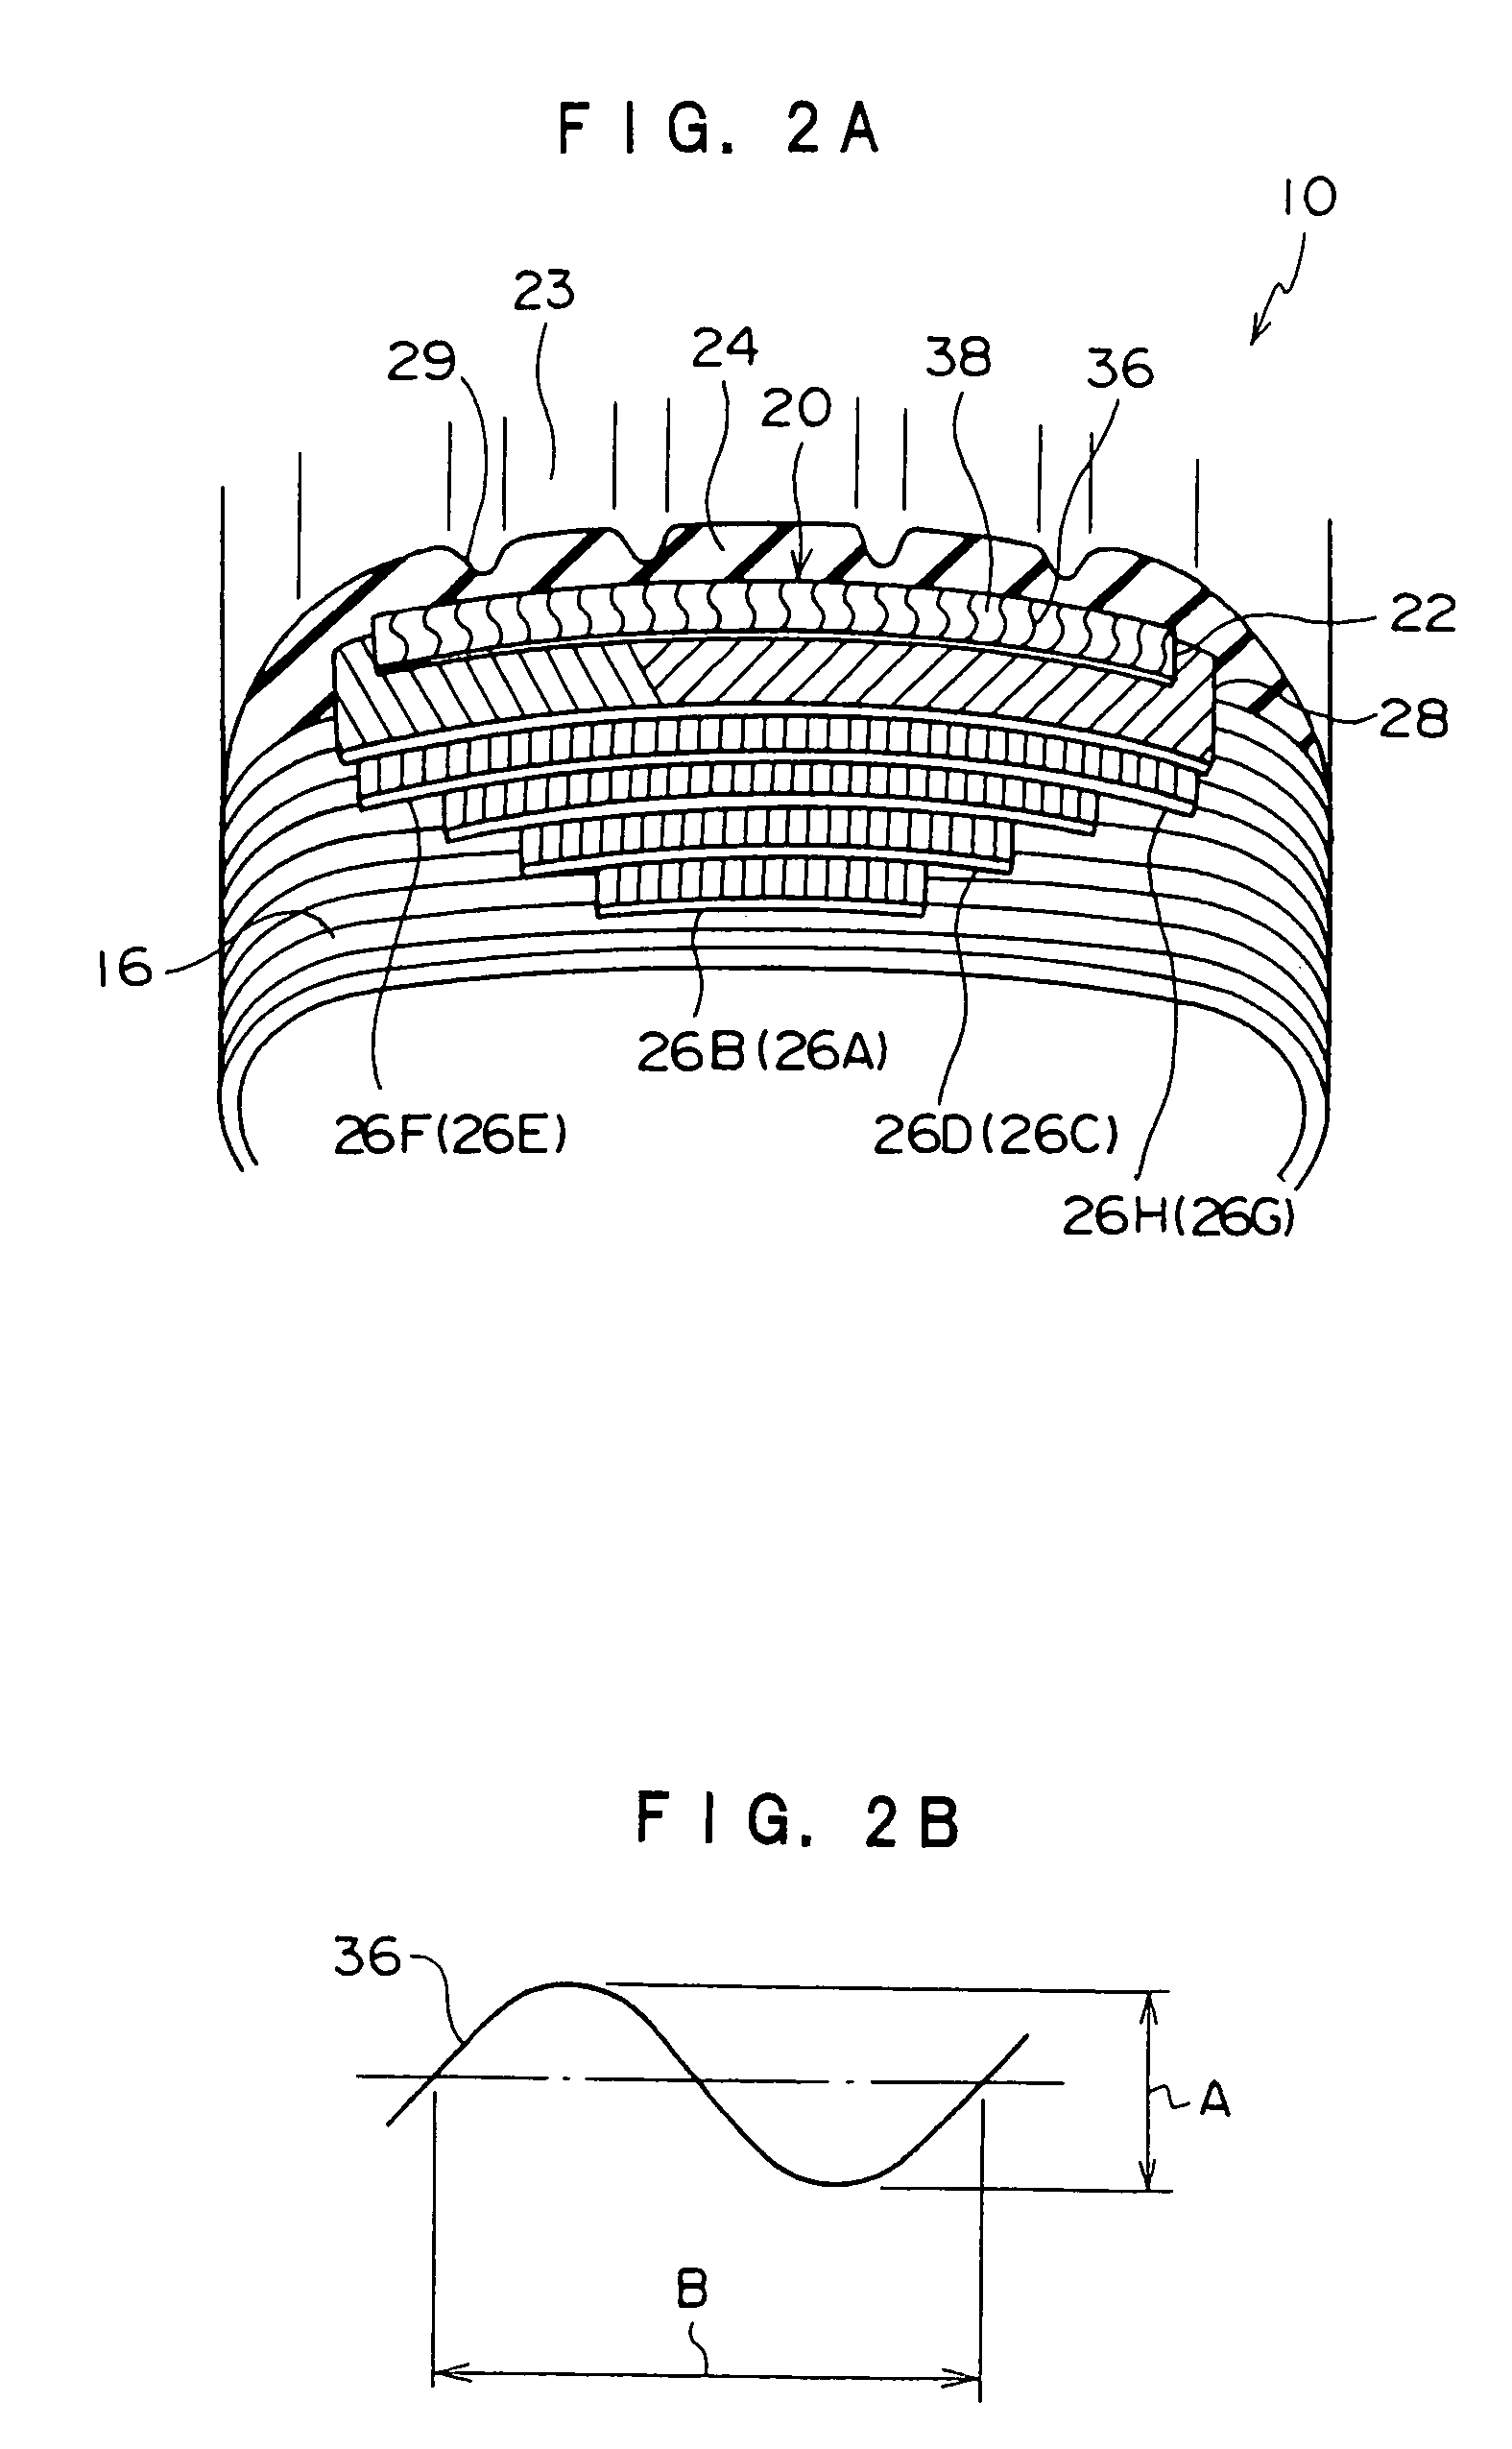 Pneumatic radial tire with specified belt layer